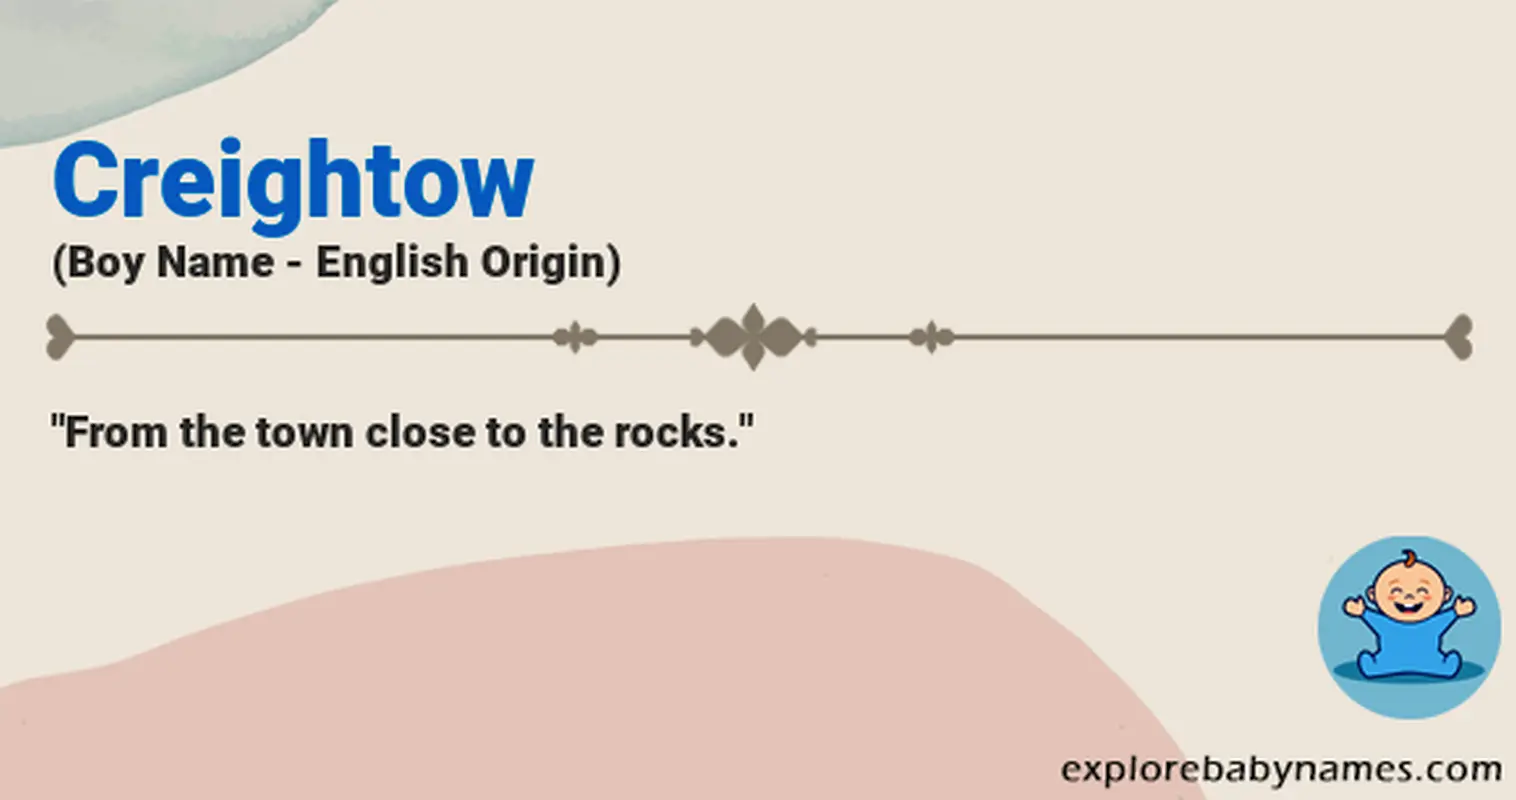 Meaning of Creightow